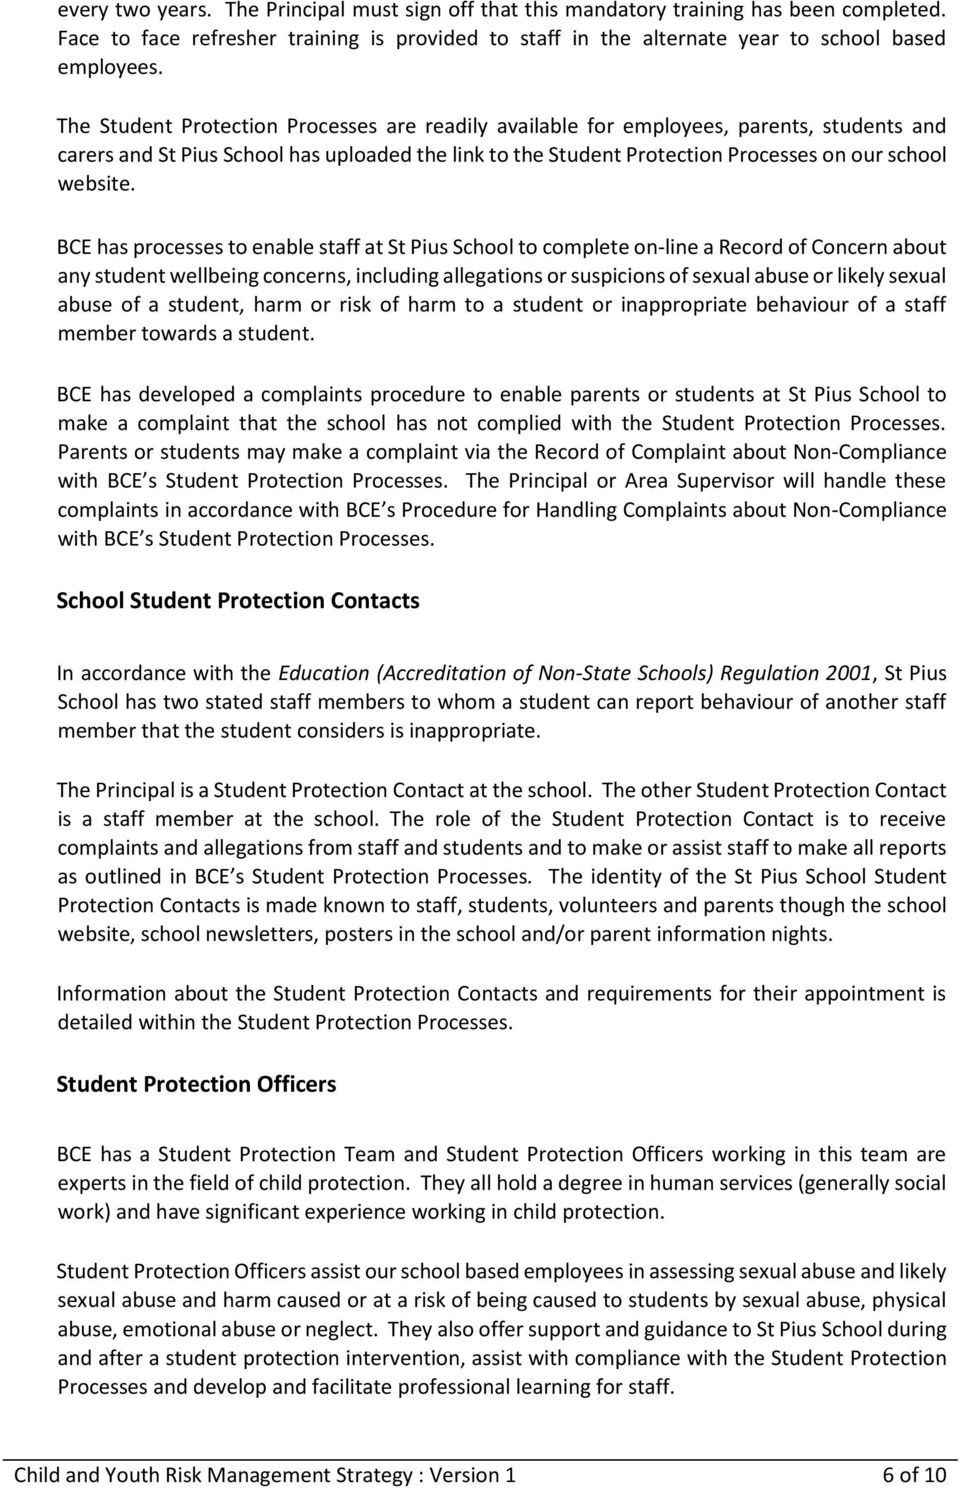 BCE has processes to enable staff at St Pius School to complete on-line a Record of Concern about any student wellbeing concerns, including allegations or suspicions of sexual abuse or likely sexual